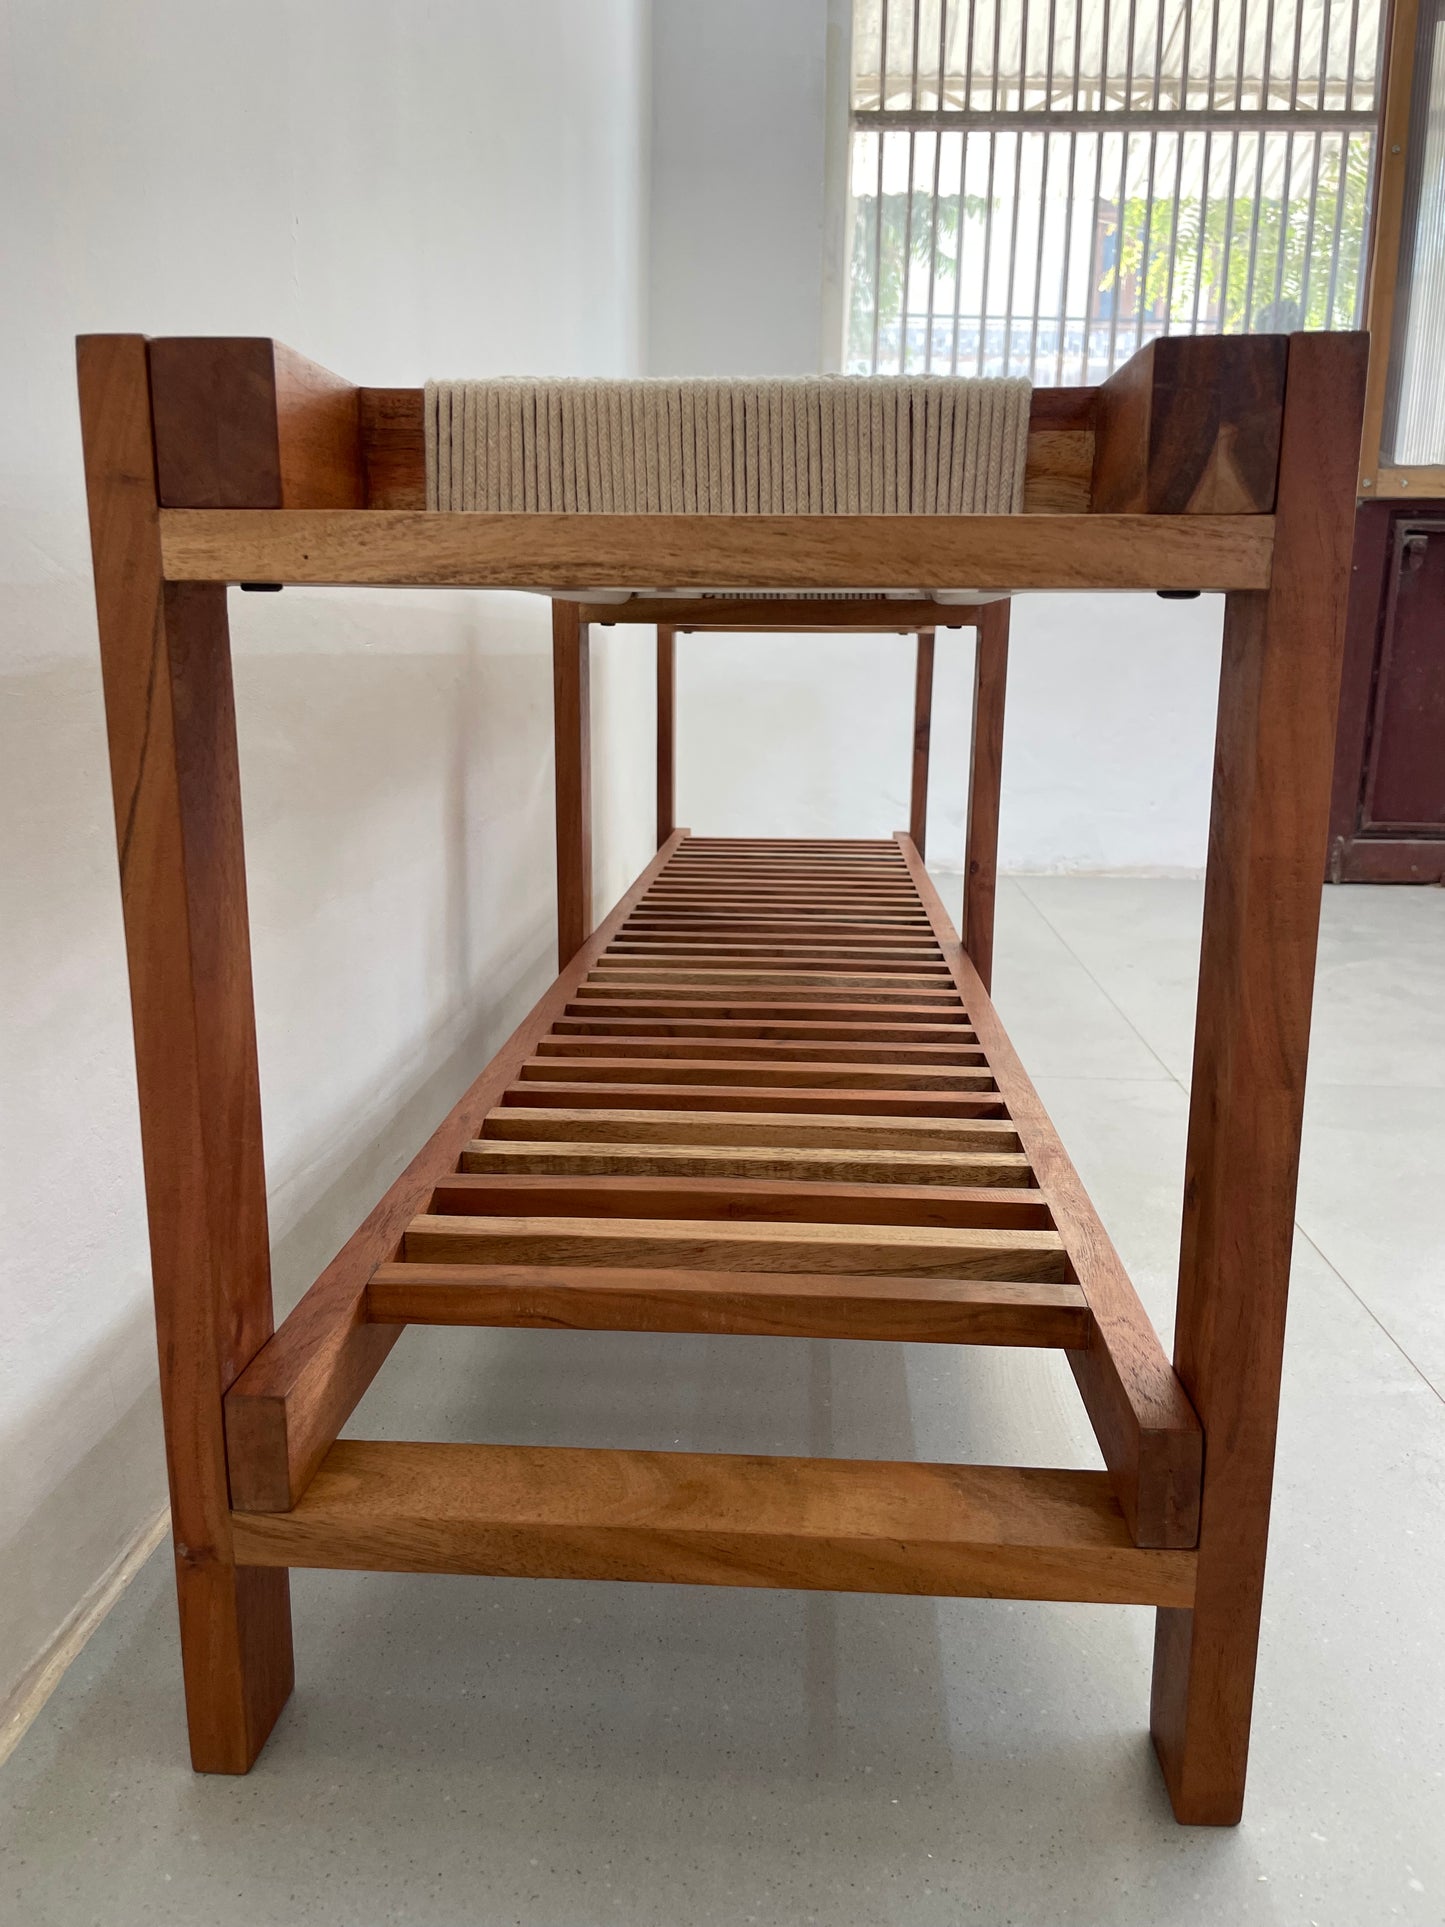 Woven Bench with Shoe Rack - 60 Inches